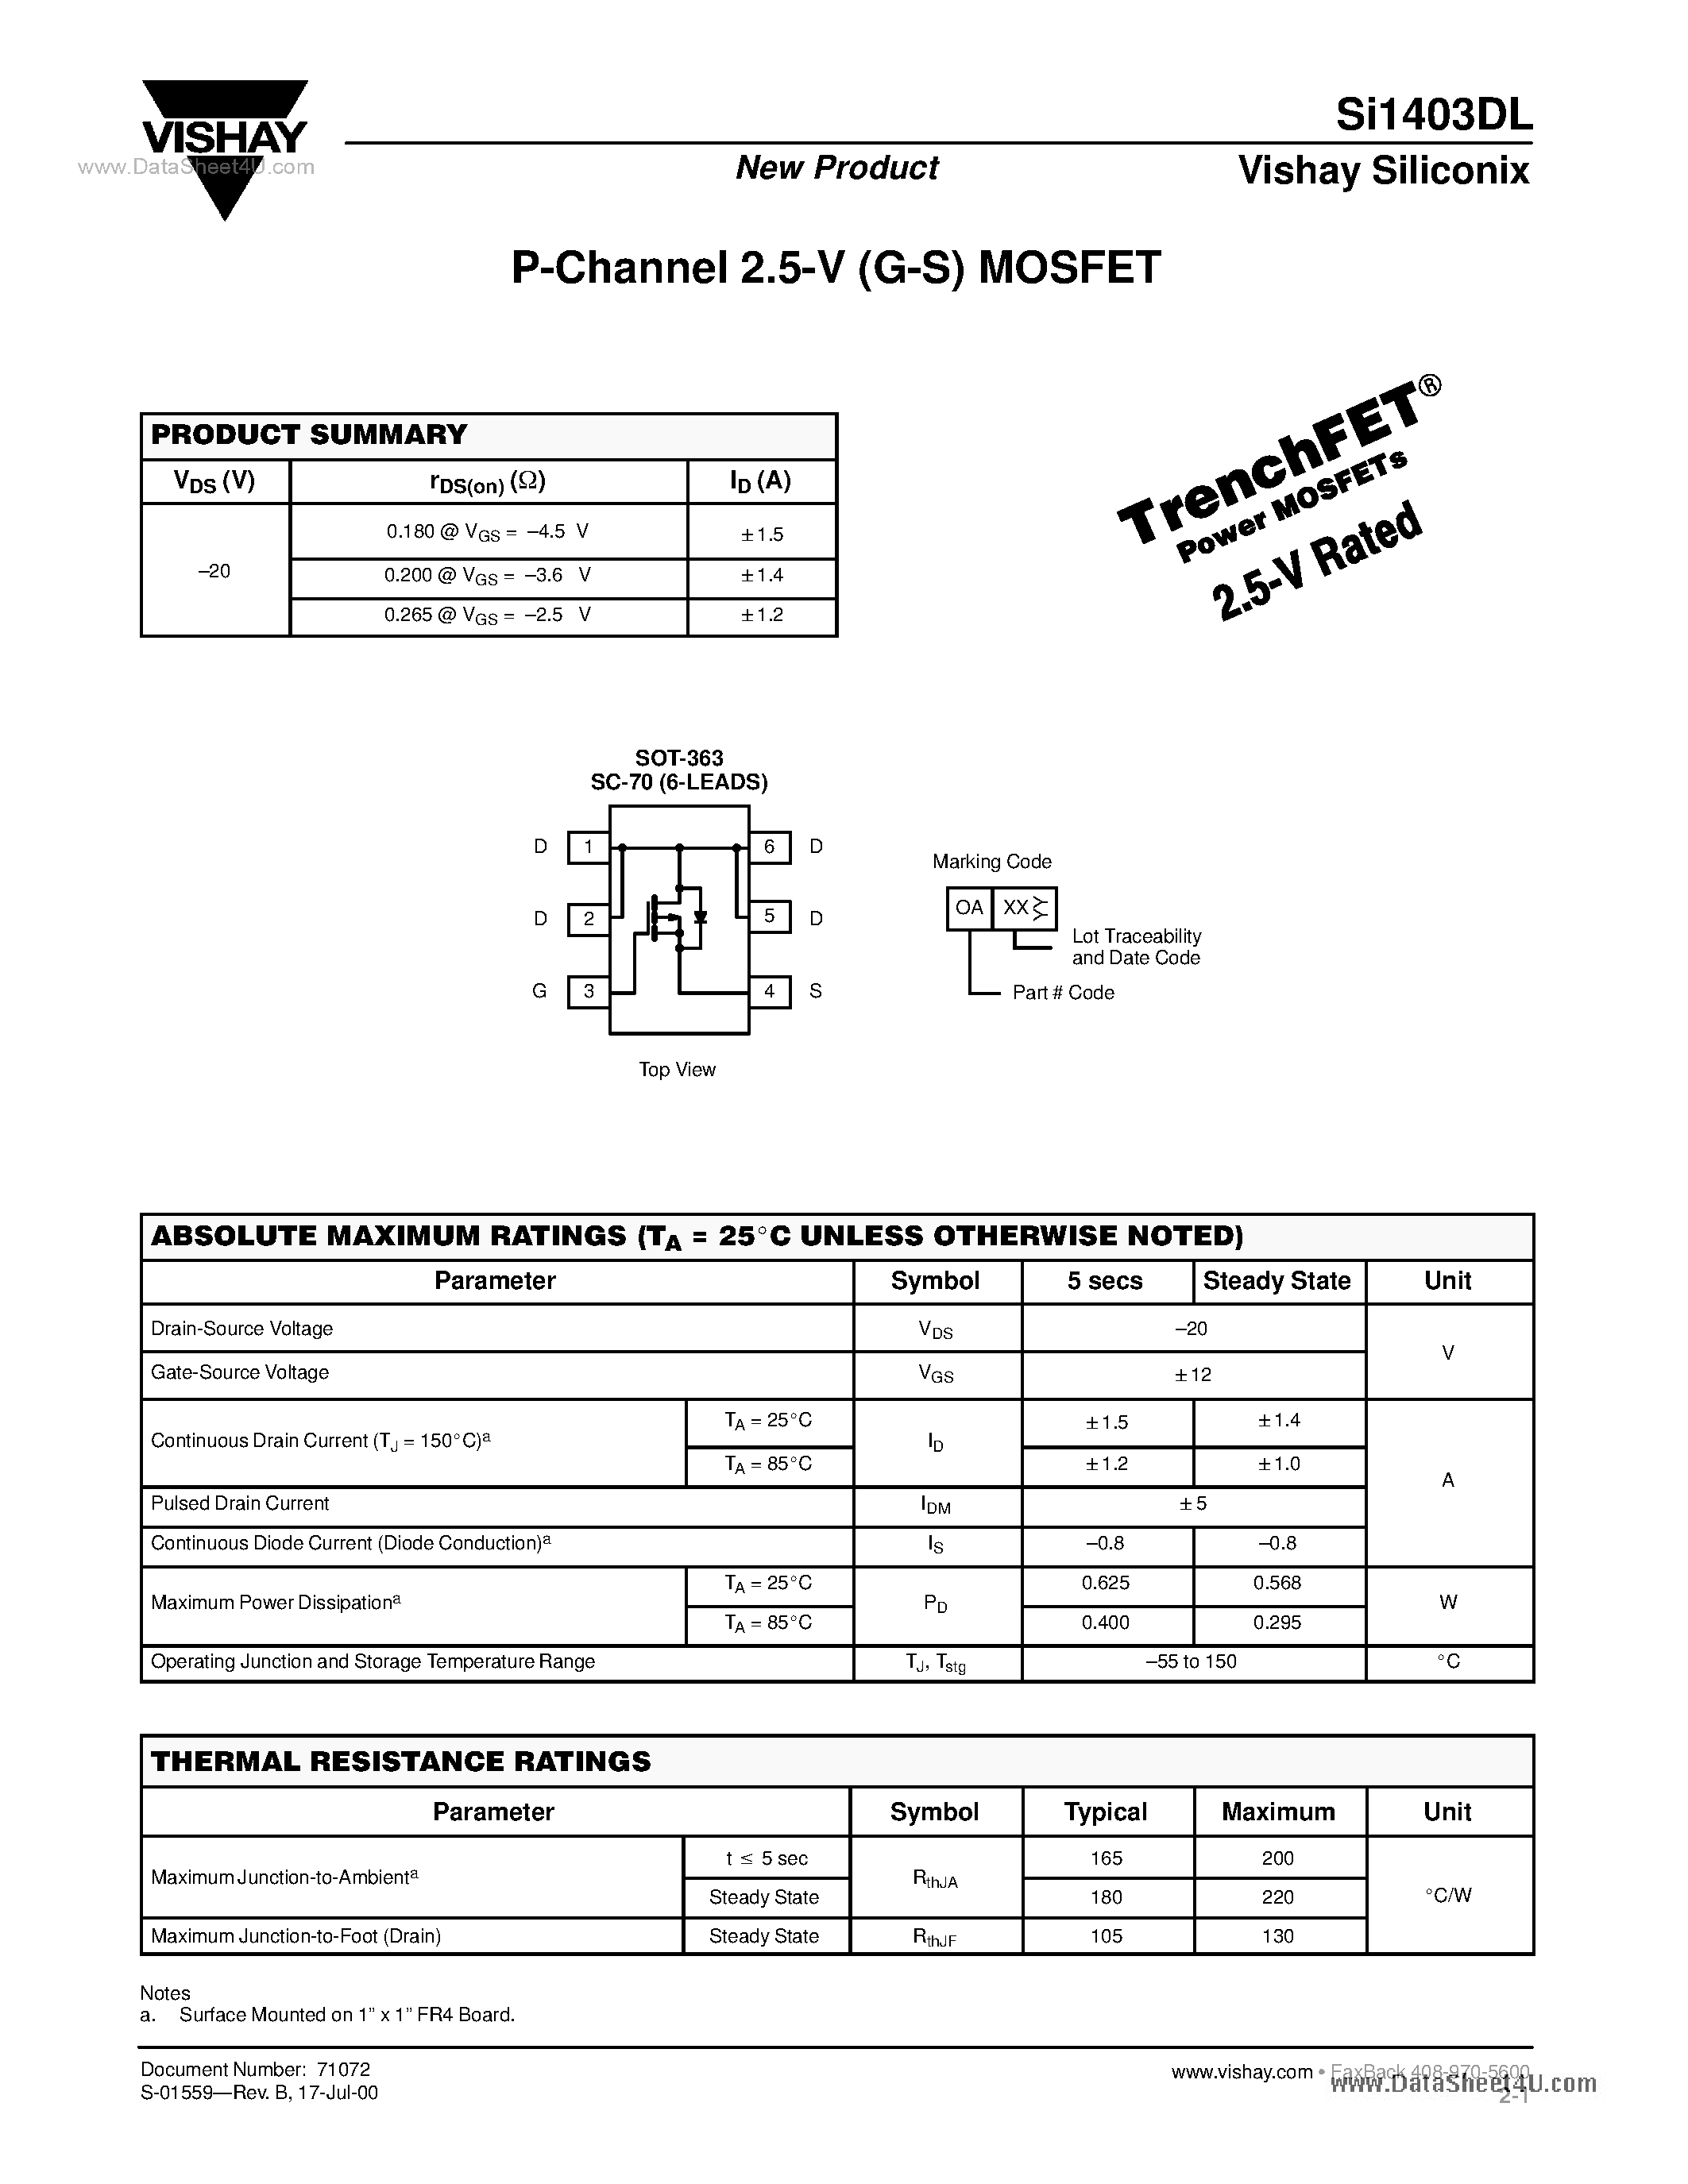 Datasheet SI1403DL - P-Channel 2.5-V (G-S) MOSFET page 1